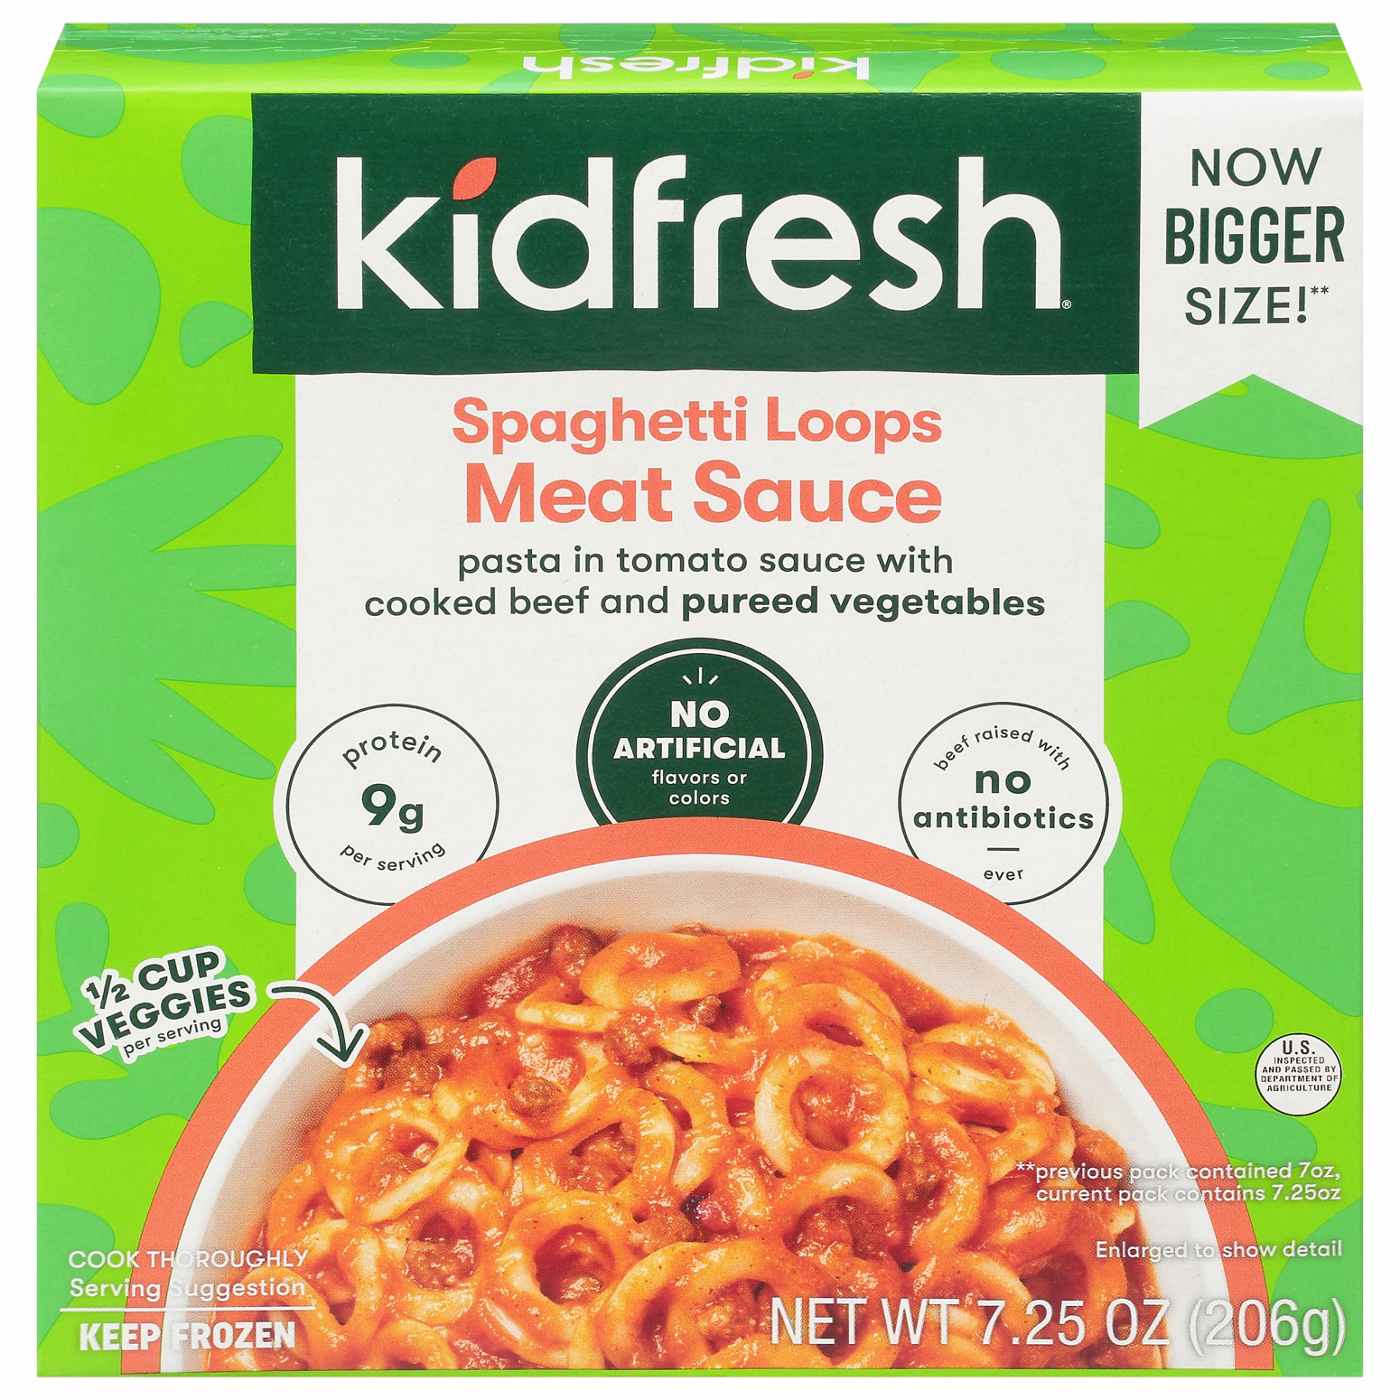 Kidfresh Spaghetti Loops in Meat Sauce Frozen Meal; image 1 of 2